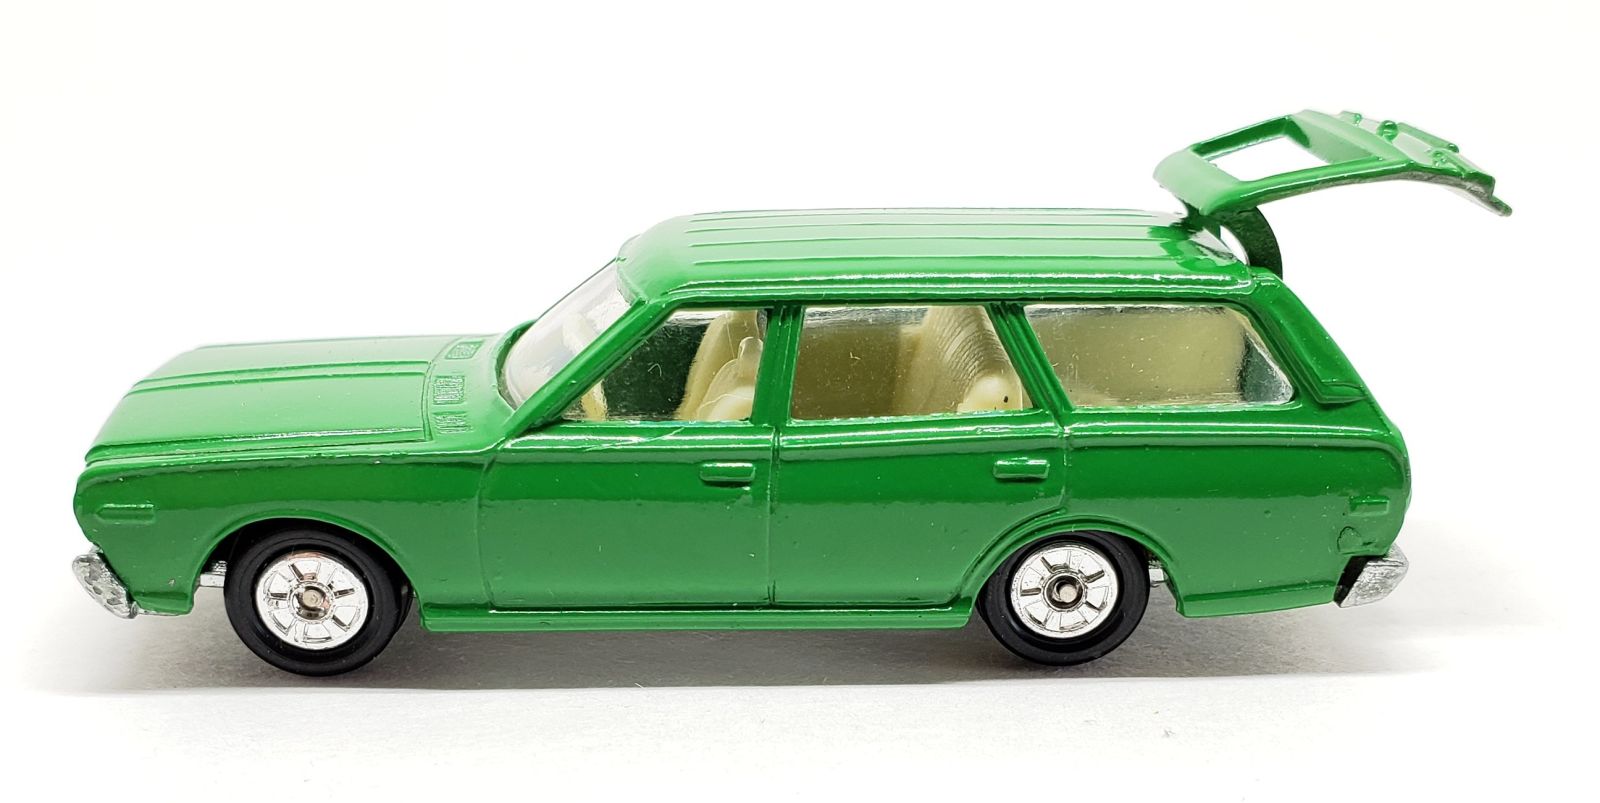 Illustration for article titled [REVIEW] Tomica Nissan Cedric Wagon